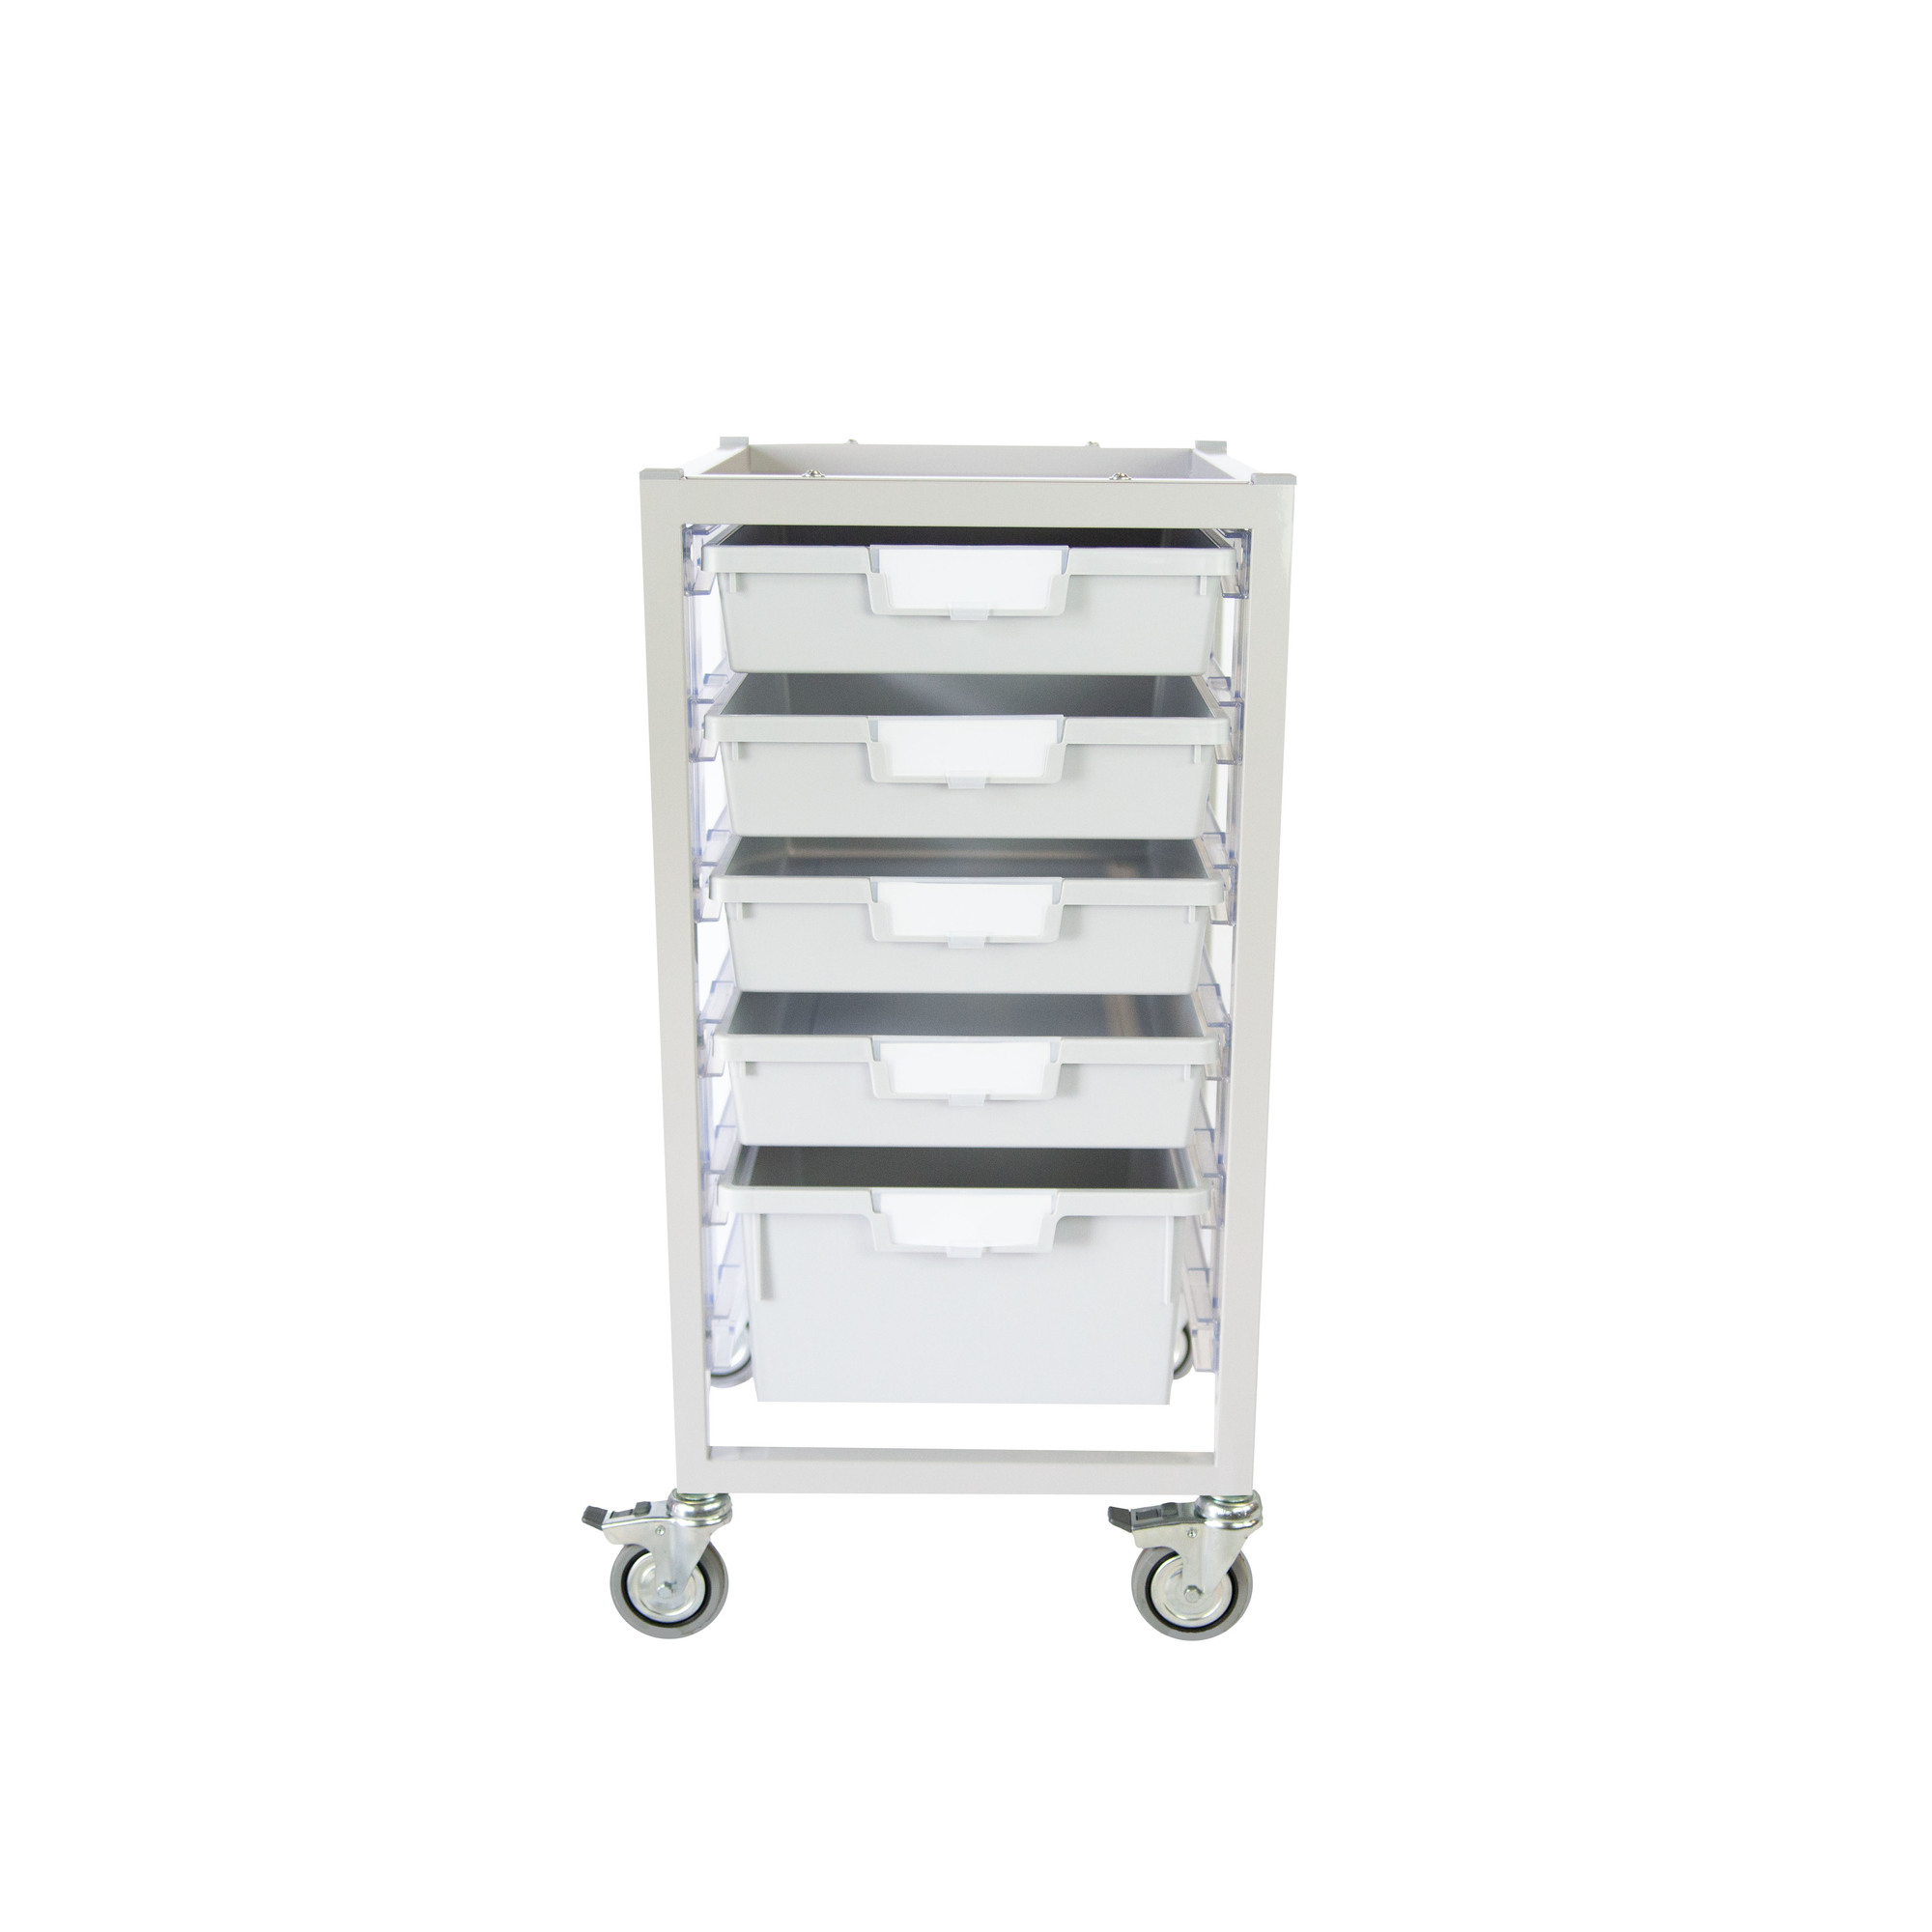 Certwood, Nimble Cart Slim-Gray with 5 Gray Trays, Included (qty.) 1, Material Steel, Height 15.75 in, Model CE2100LG-4S1DLG